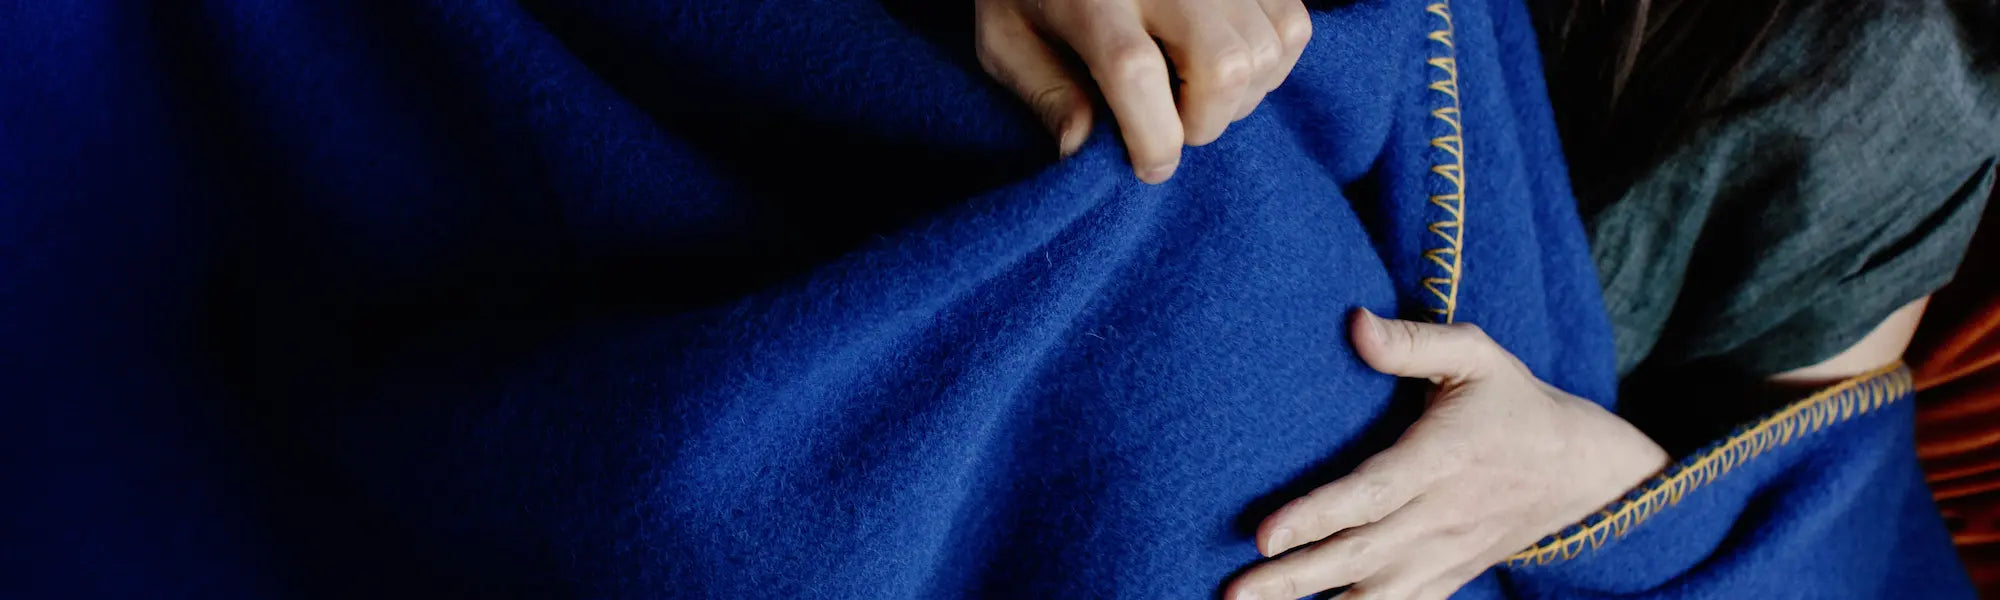 Hands feeling and pulling a deep blue throw blanket